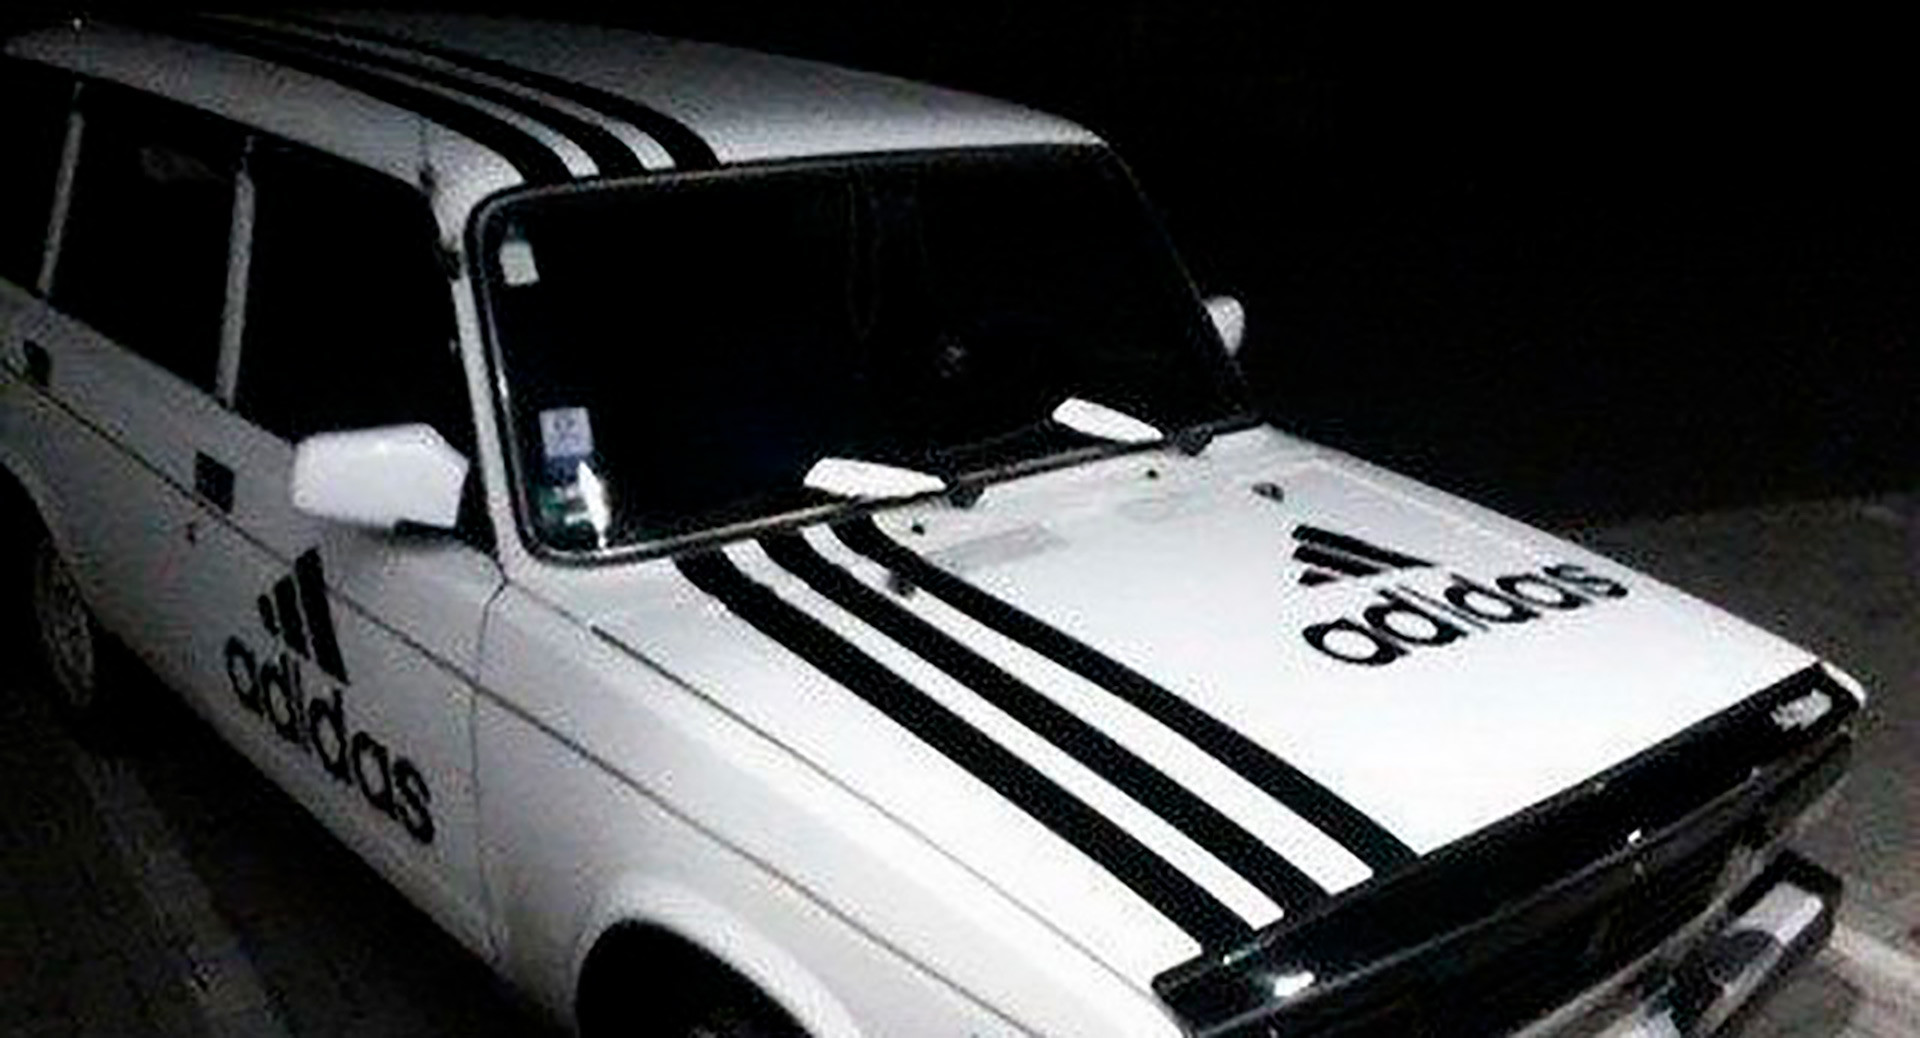 In Russia, you can put three stripes on a car...